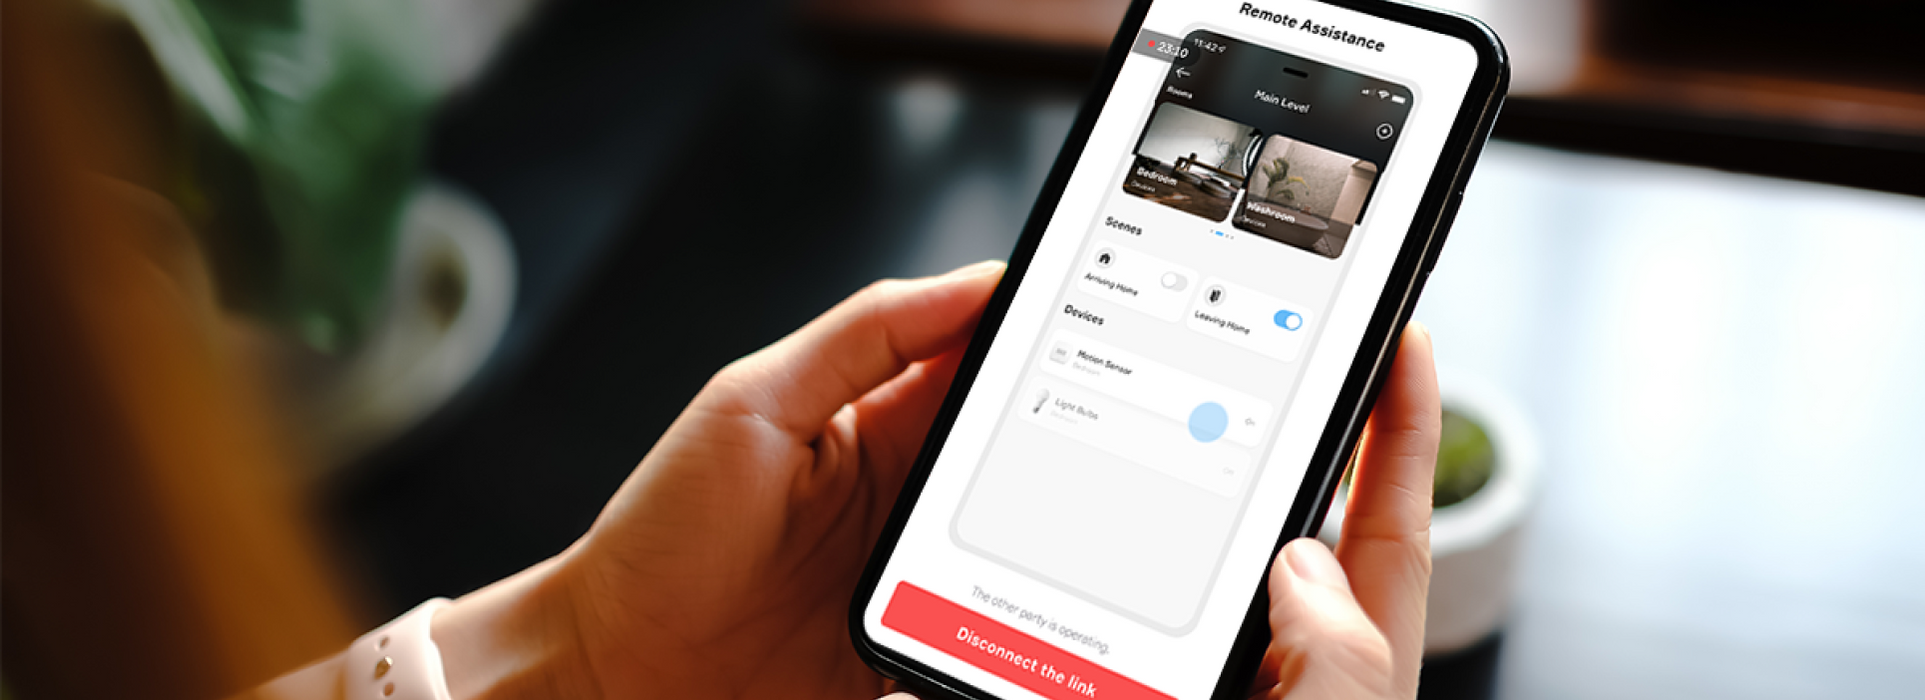 Features of Smart Home Apps That Make Life Easier